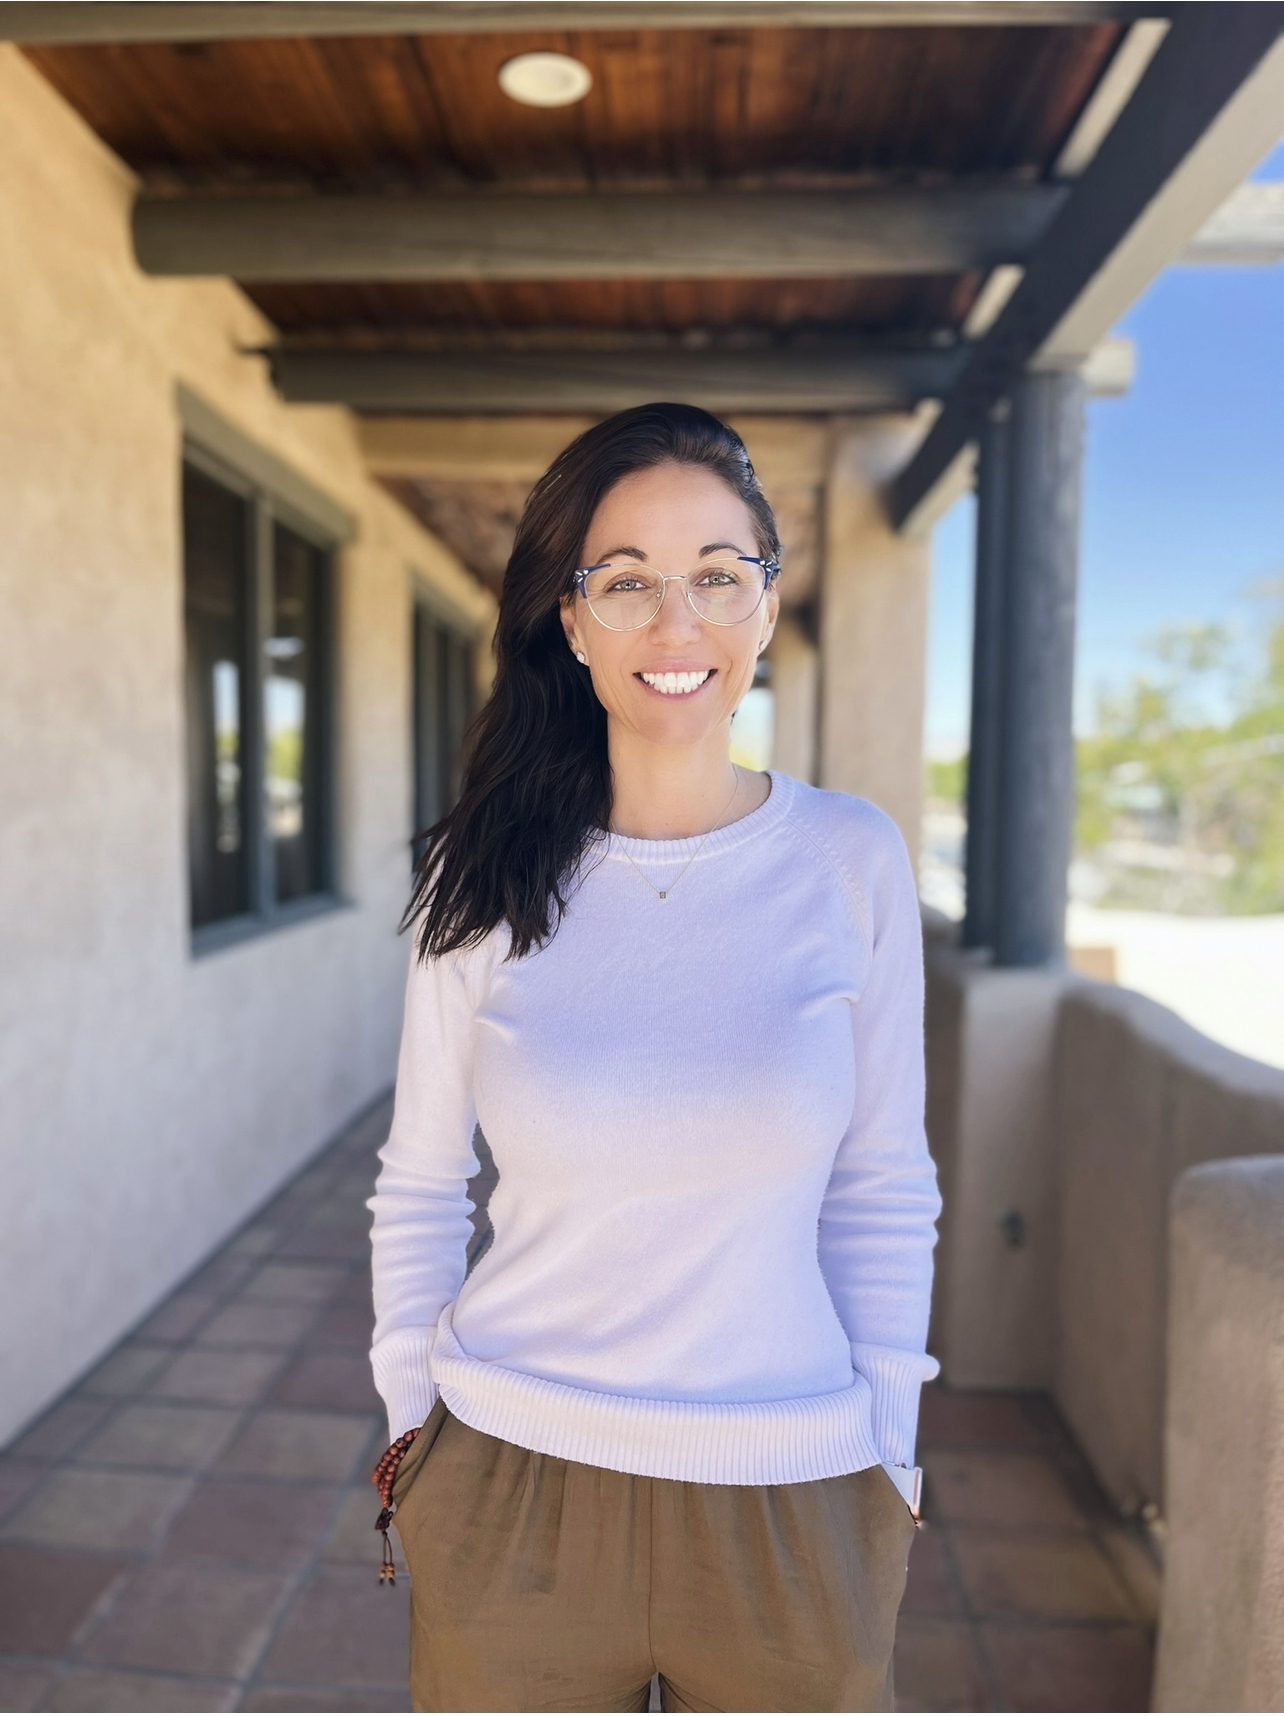 Woman smiling in glasses, wearing a light sweater, standing on a porch with a clear sky behind her in Palm Desert.